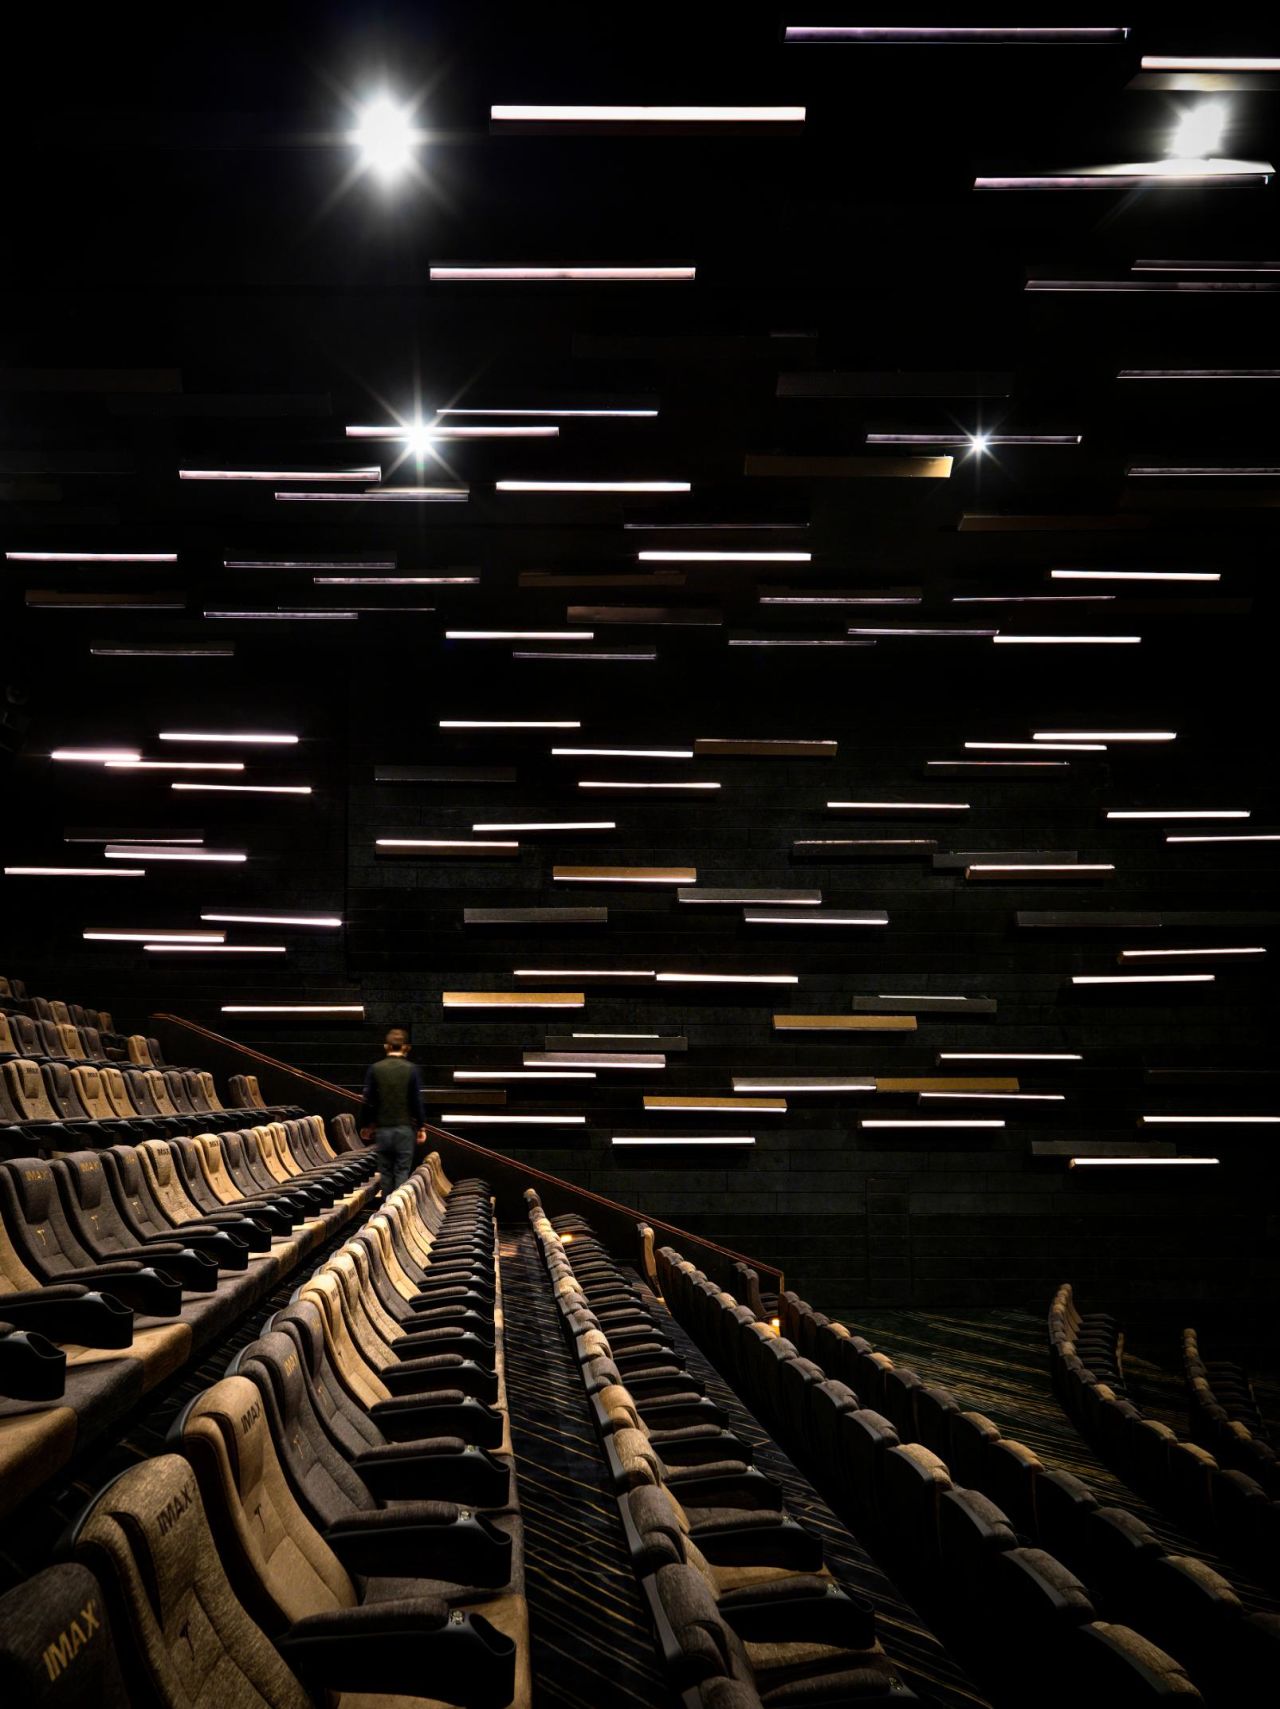 The Guangzhou Haizhucheng IMAX was designed around the theme of a meteor shower. Often known as the "Meteor Cinema," the complex stretches over two floors and more than 44,000 square feet of floor space.